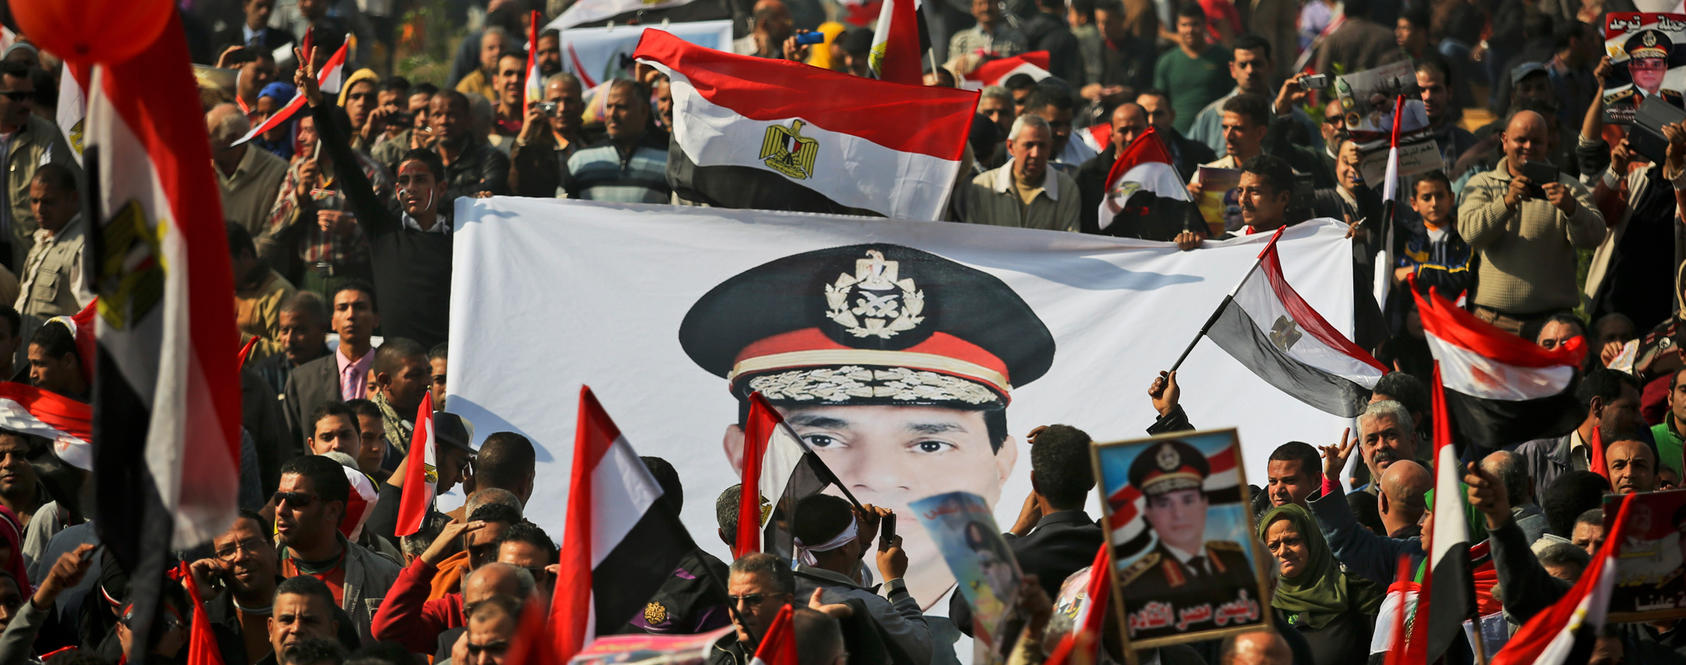 Supporters of the military wave national flags and hold posters and banners of Gen. Abdel-Fattah el-Sissi in Cairo's Tahrir Square, Jan. 25, 2014. The senior leaders of the Egyptian military have authorized el-Sissi to run for president, state television reported Monday, making it nearly certain that he would seek the post.